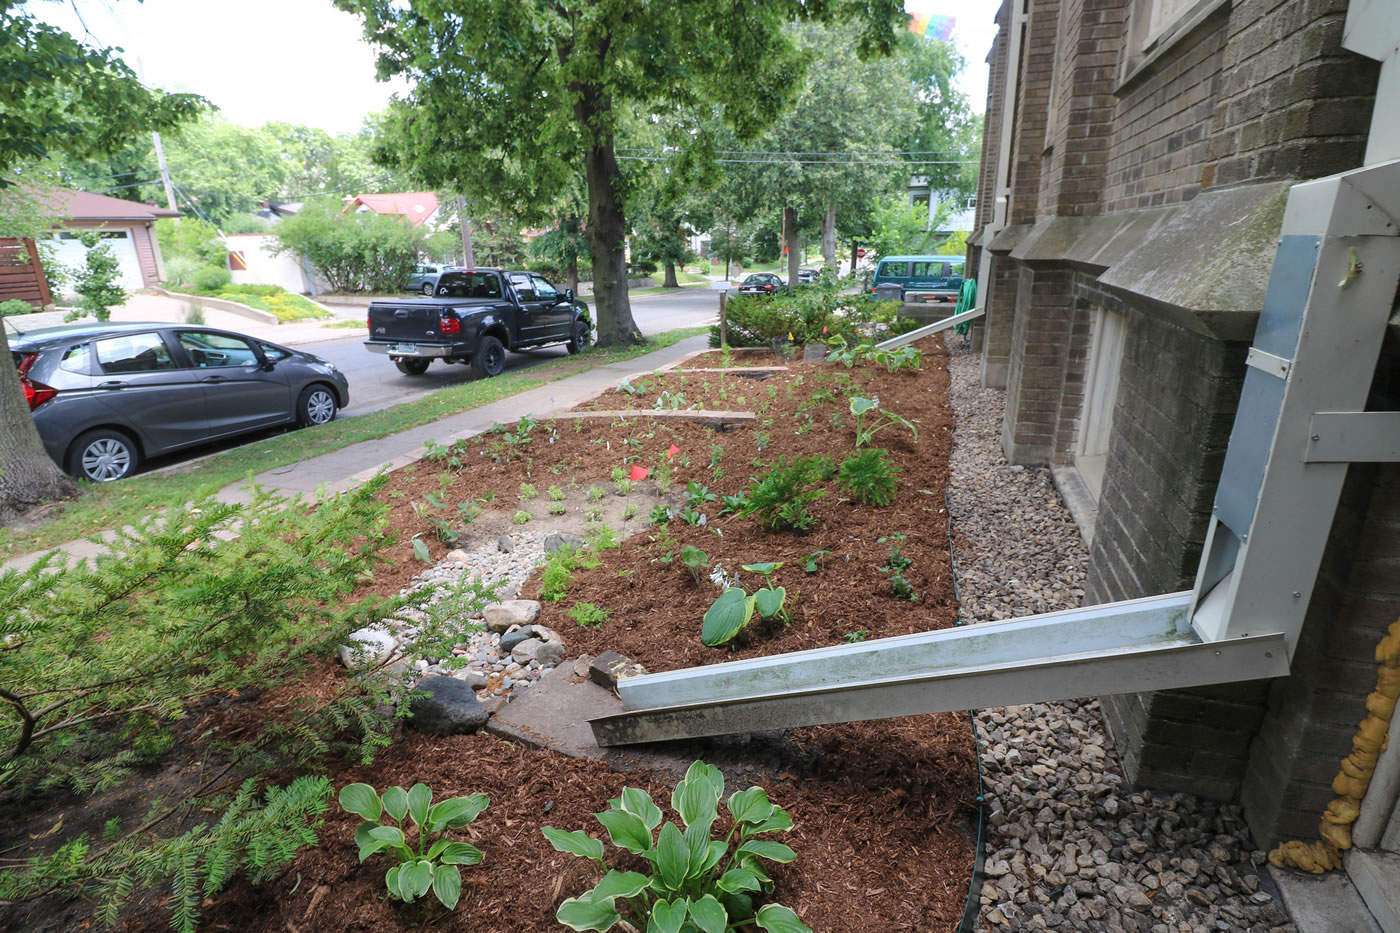 Church's raingarden project empowers and educates all ages